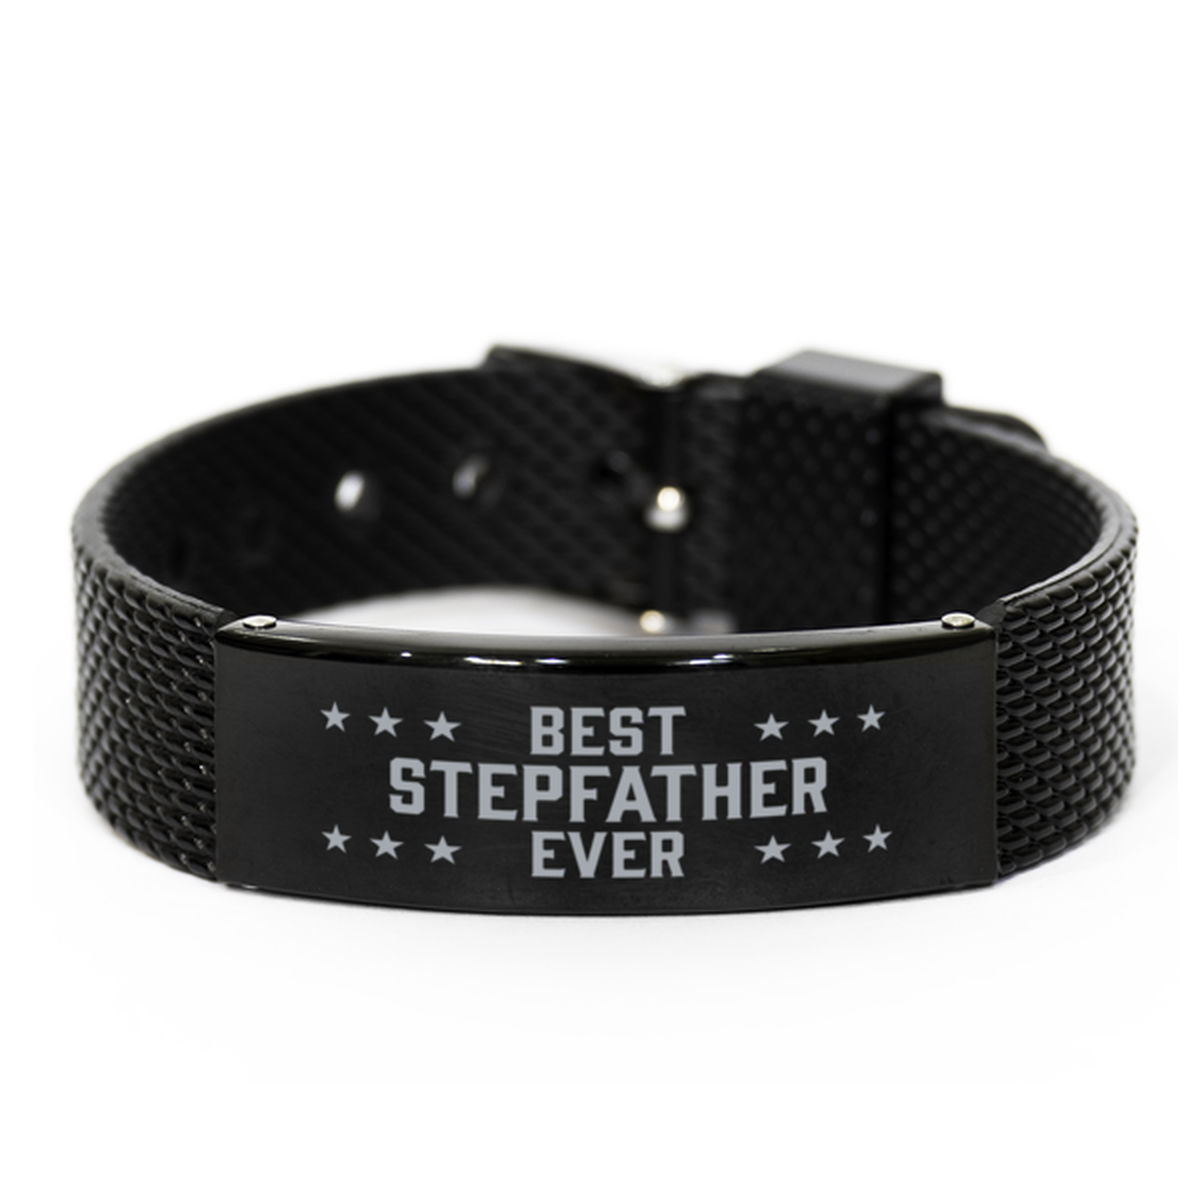 Best Stepfather Ever Stepfather Gifts, Gag Engraved Bracelet For Stepfather, Best Family Gifts For Men